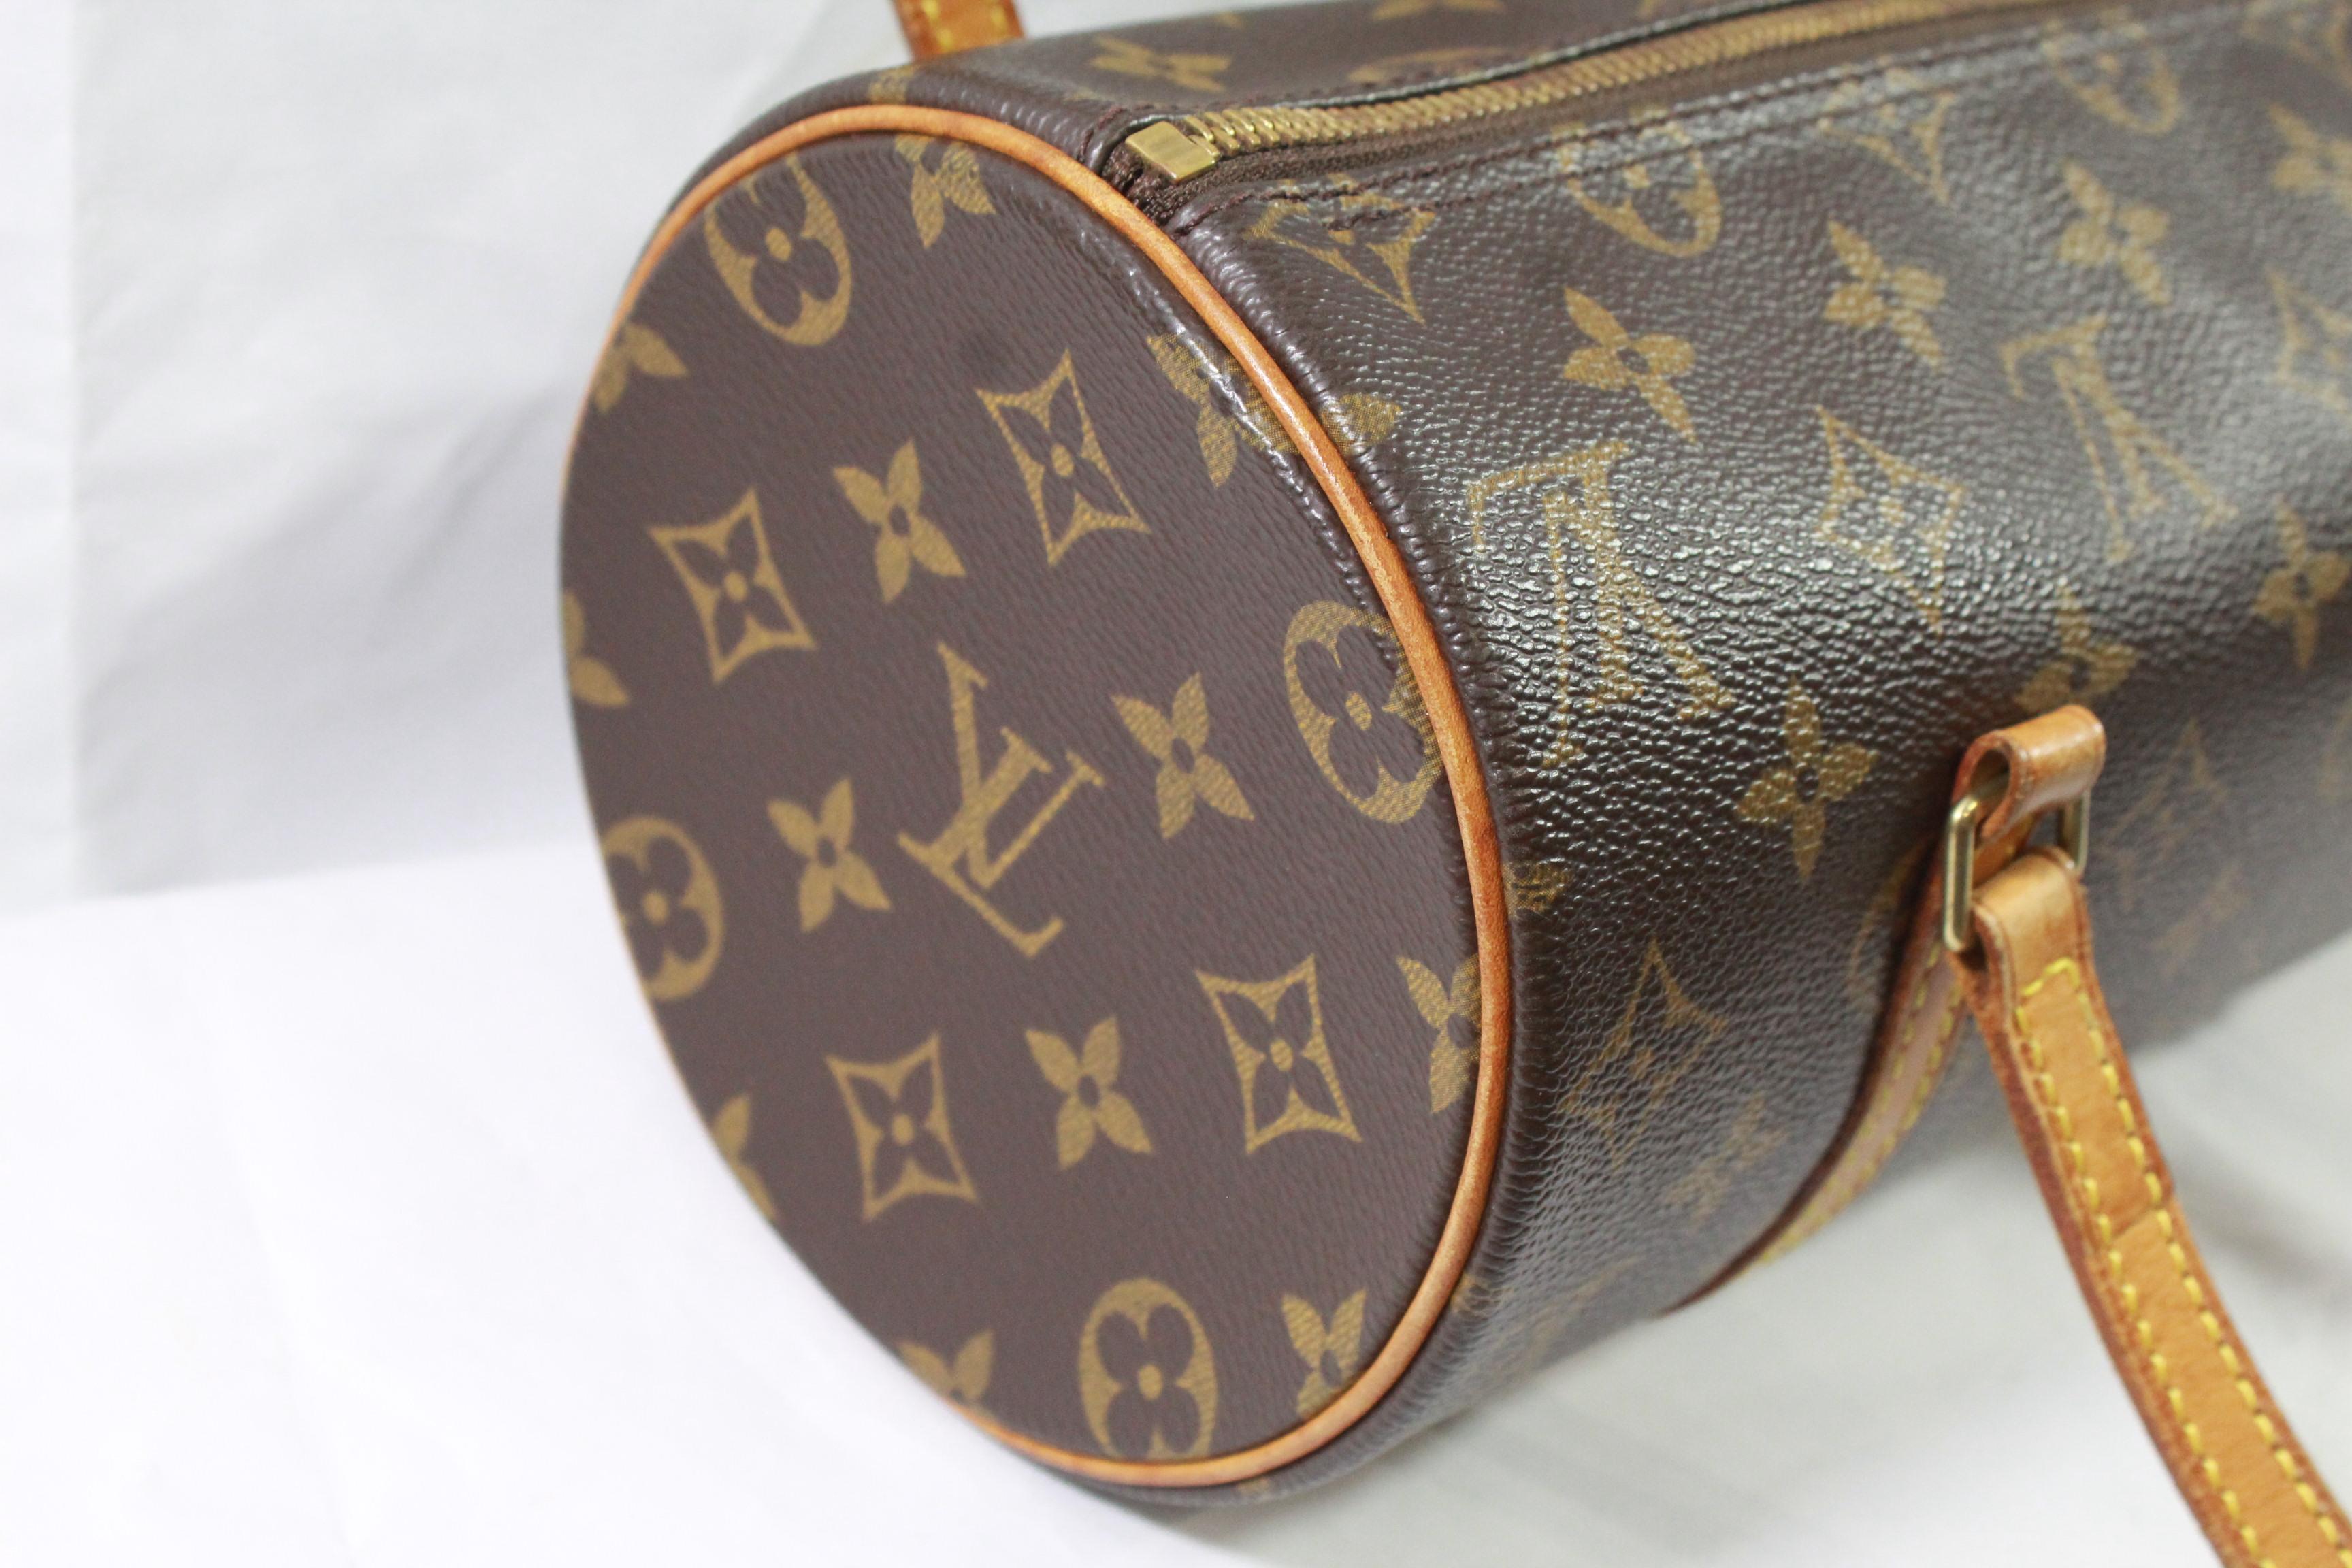 Louis Vuitton 2004 papillon PM bag.

Good condition some signs of use 

Size 27*13 diameter